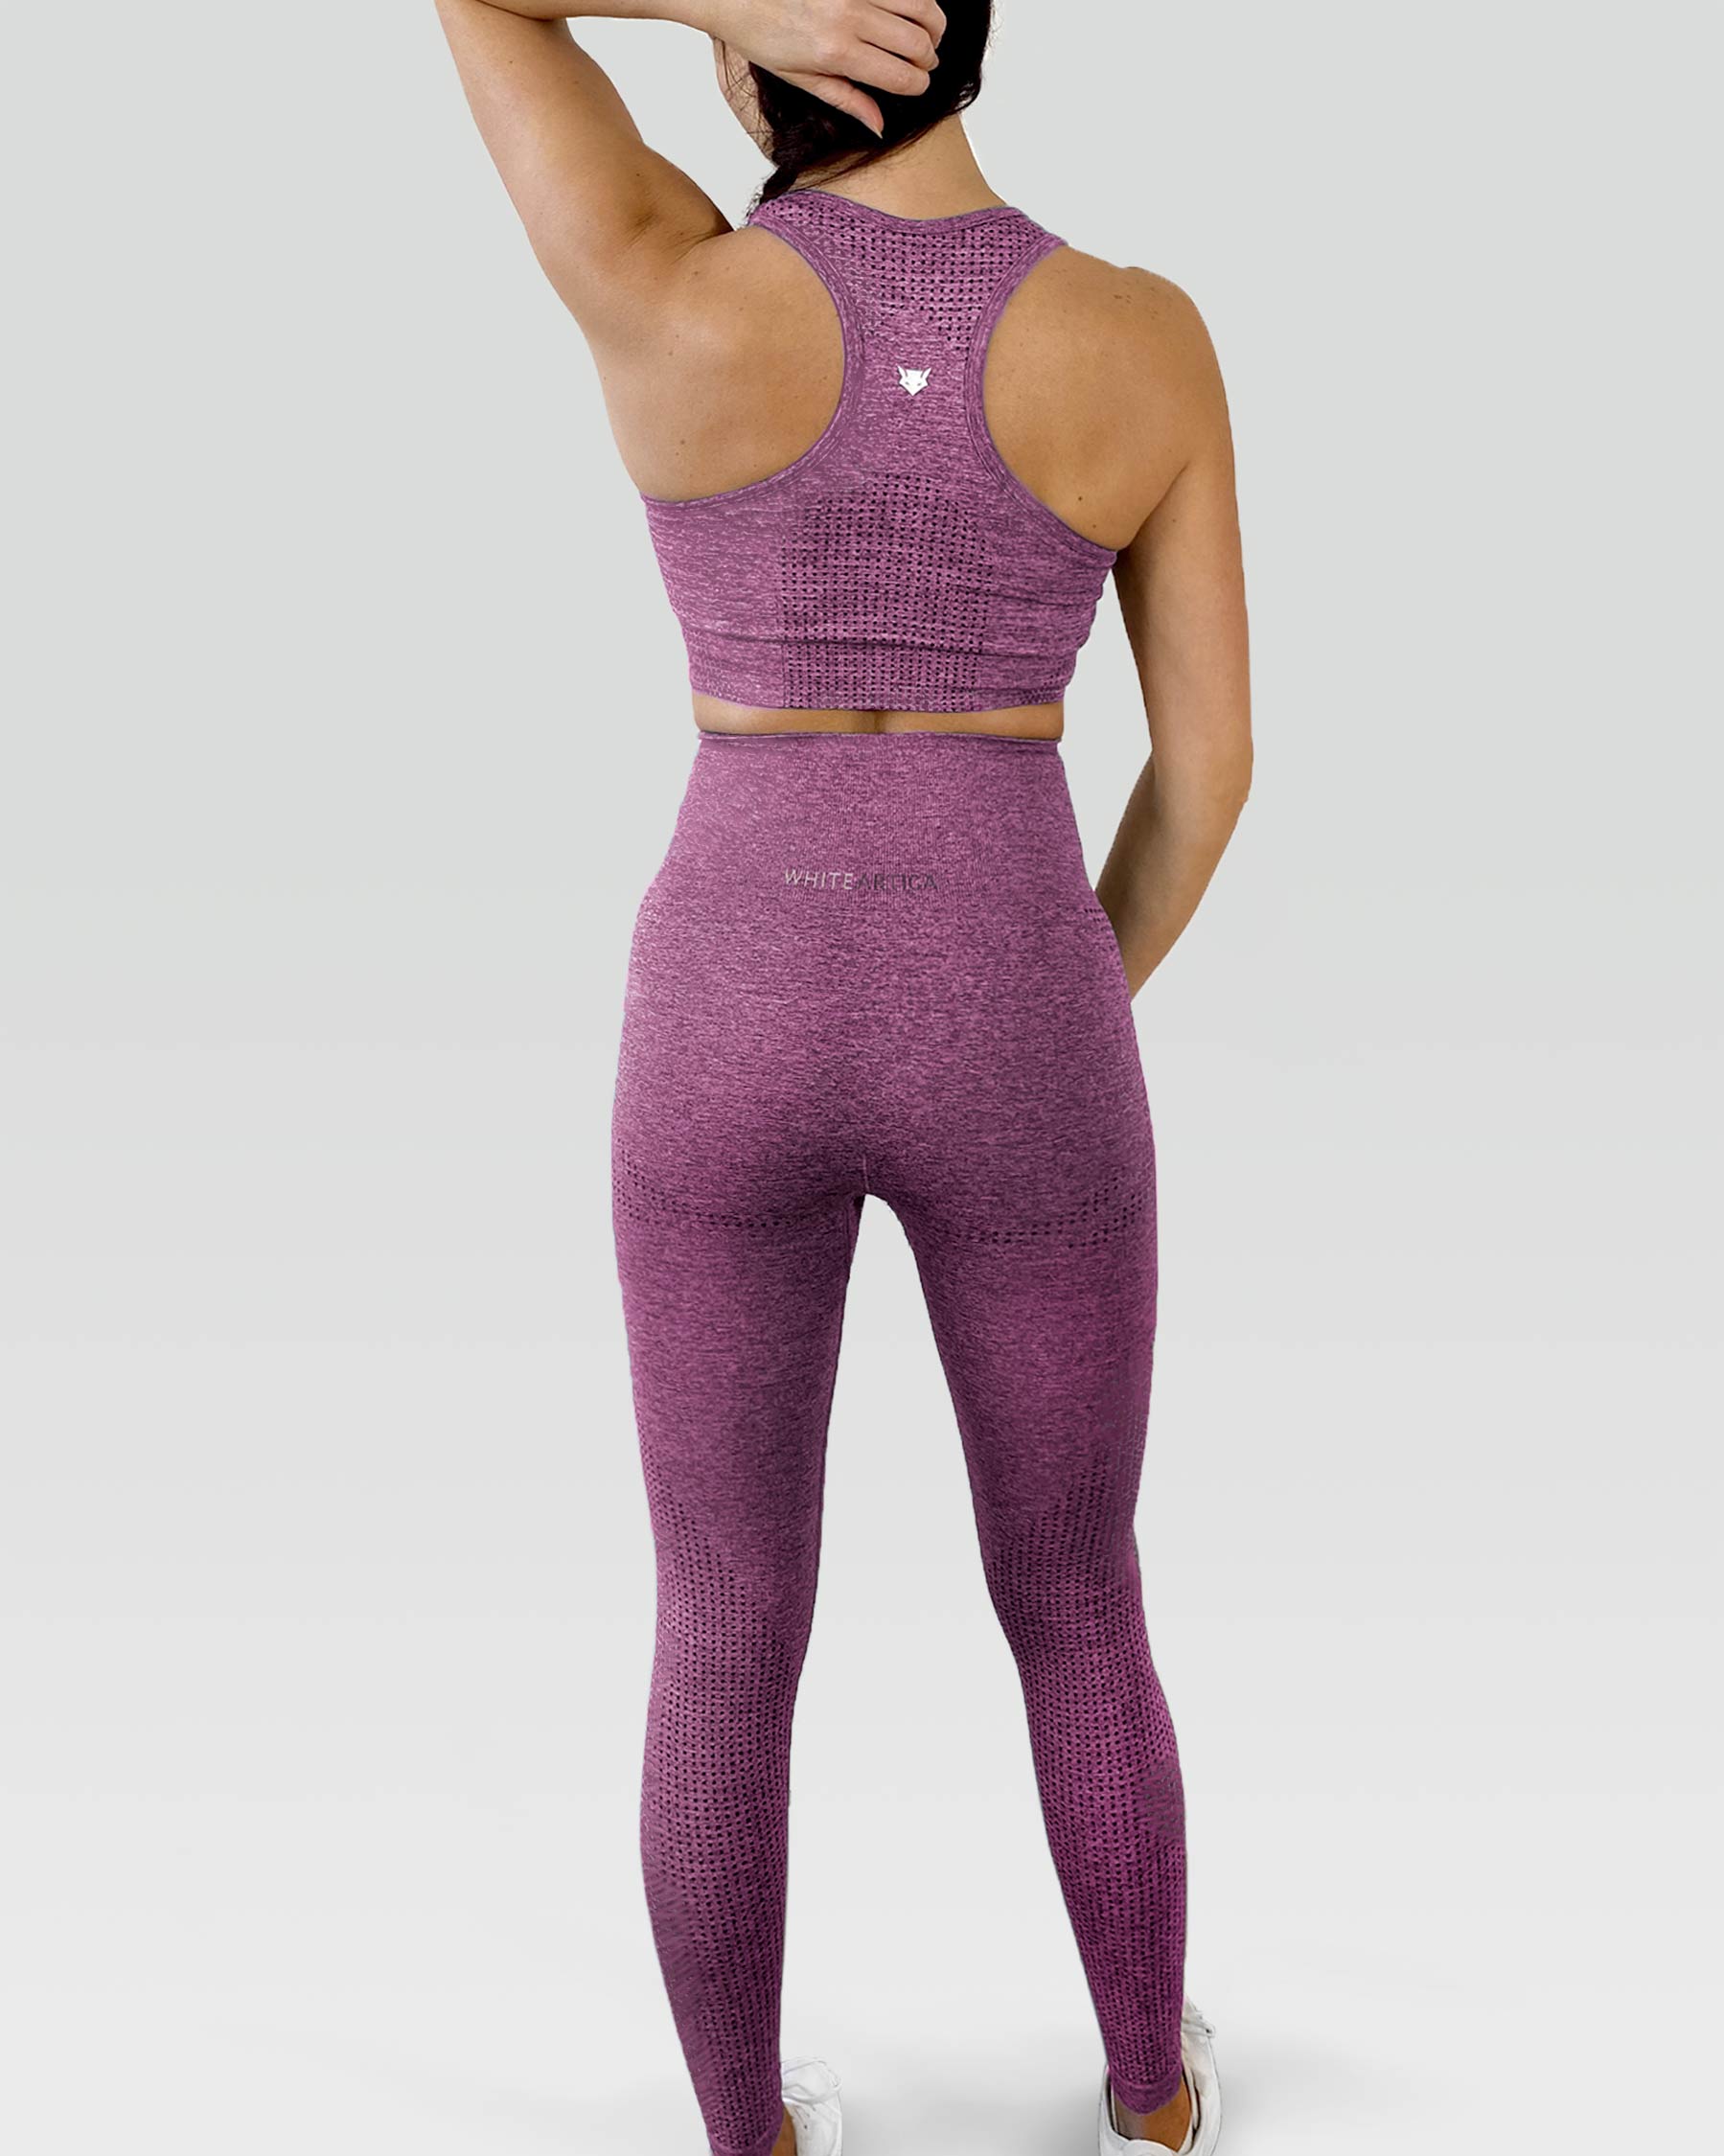 Australian woman wearing white artica high-waisted exercise pants and leggings activewear for her purple supportive activewear workout fitness cloths